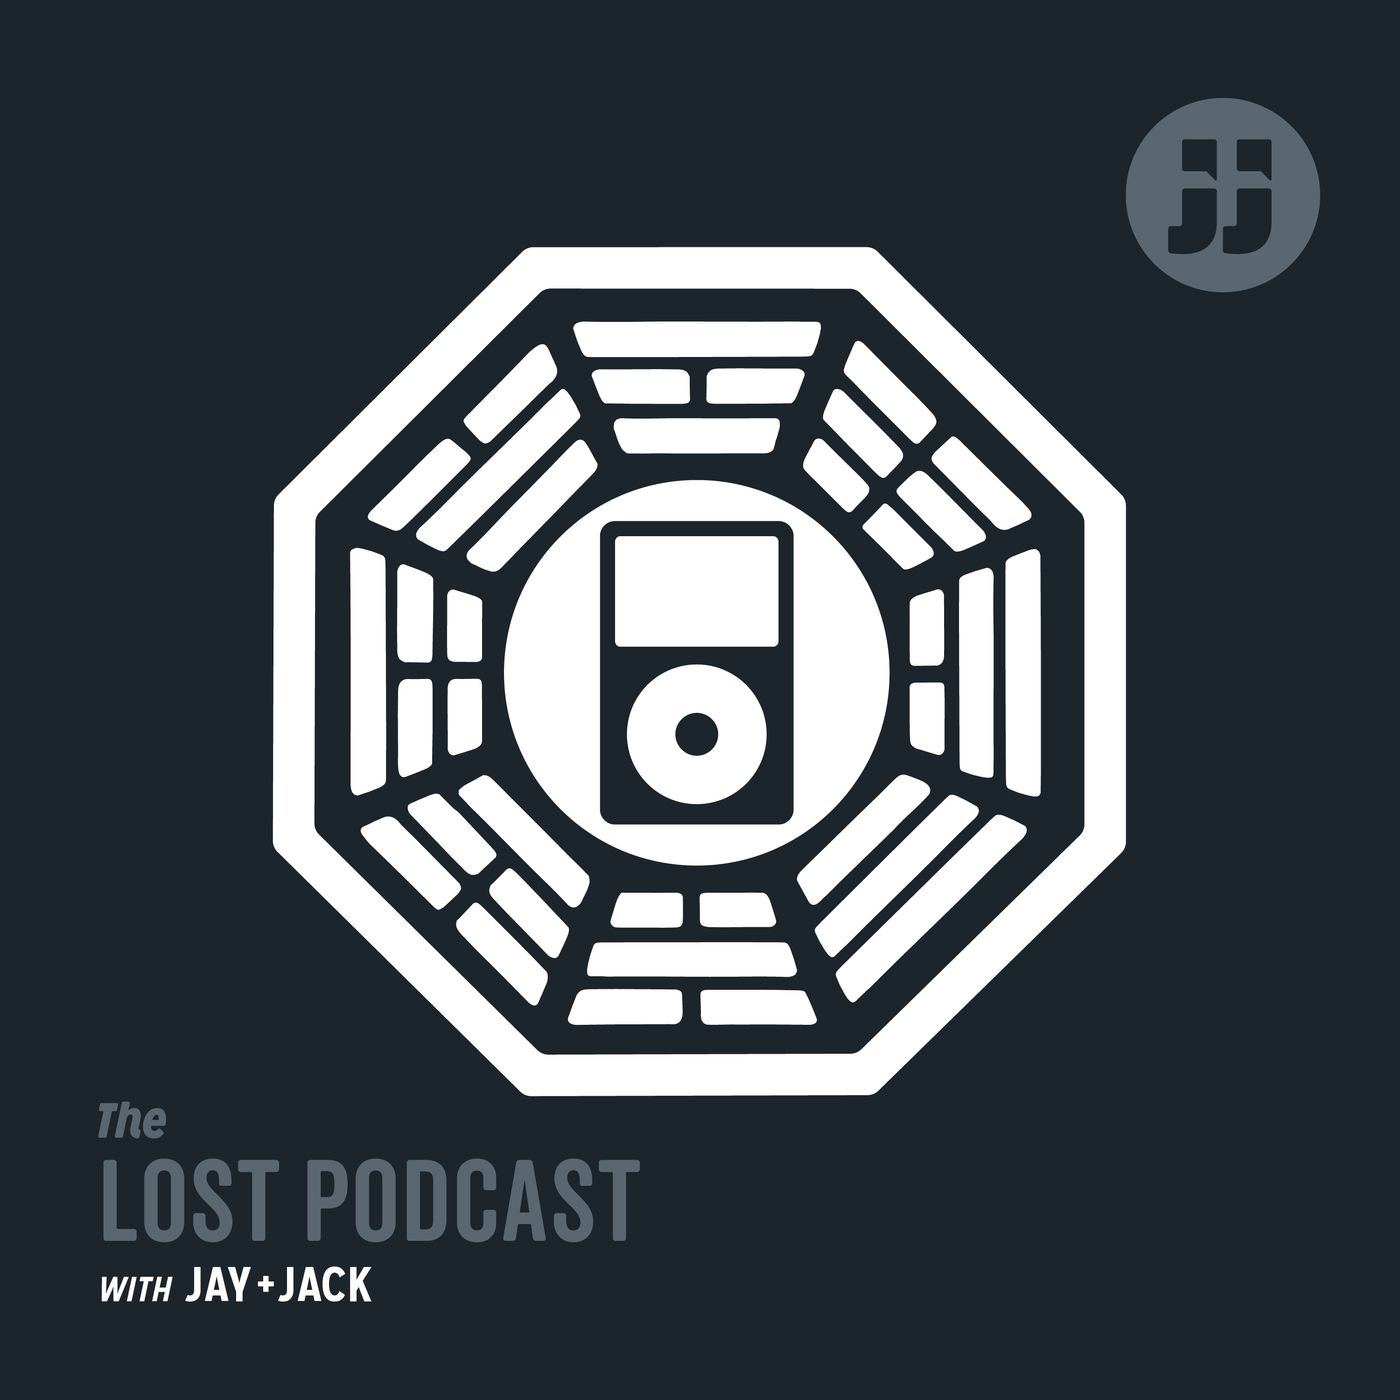 Lost Podcast (MP3): Ep. 8.2 ”What Fire + the 23rd Party Did”